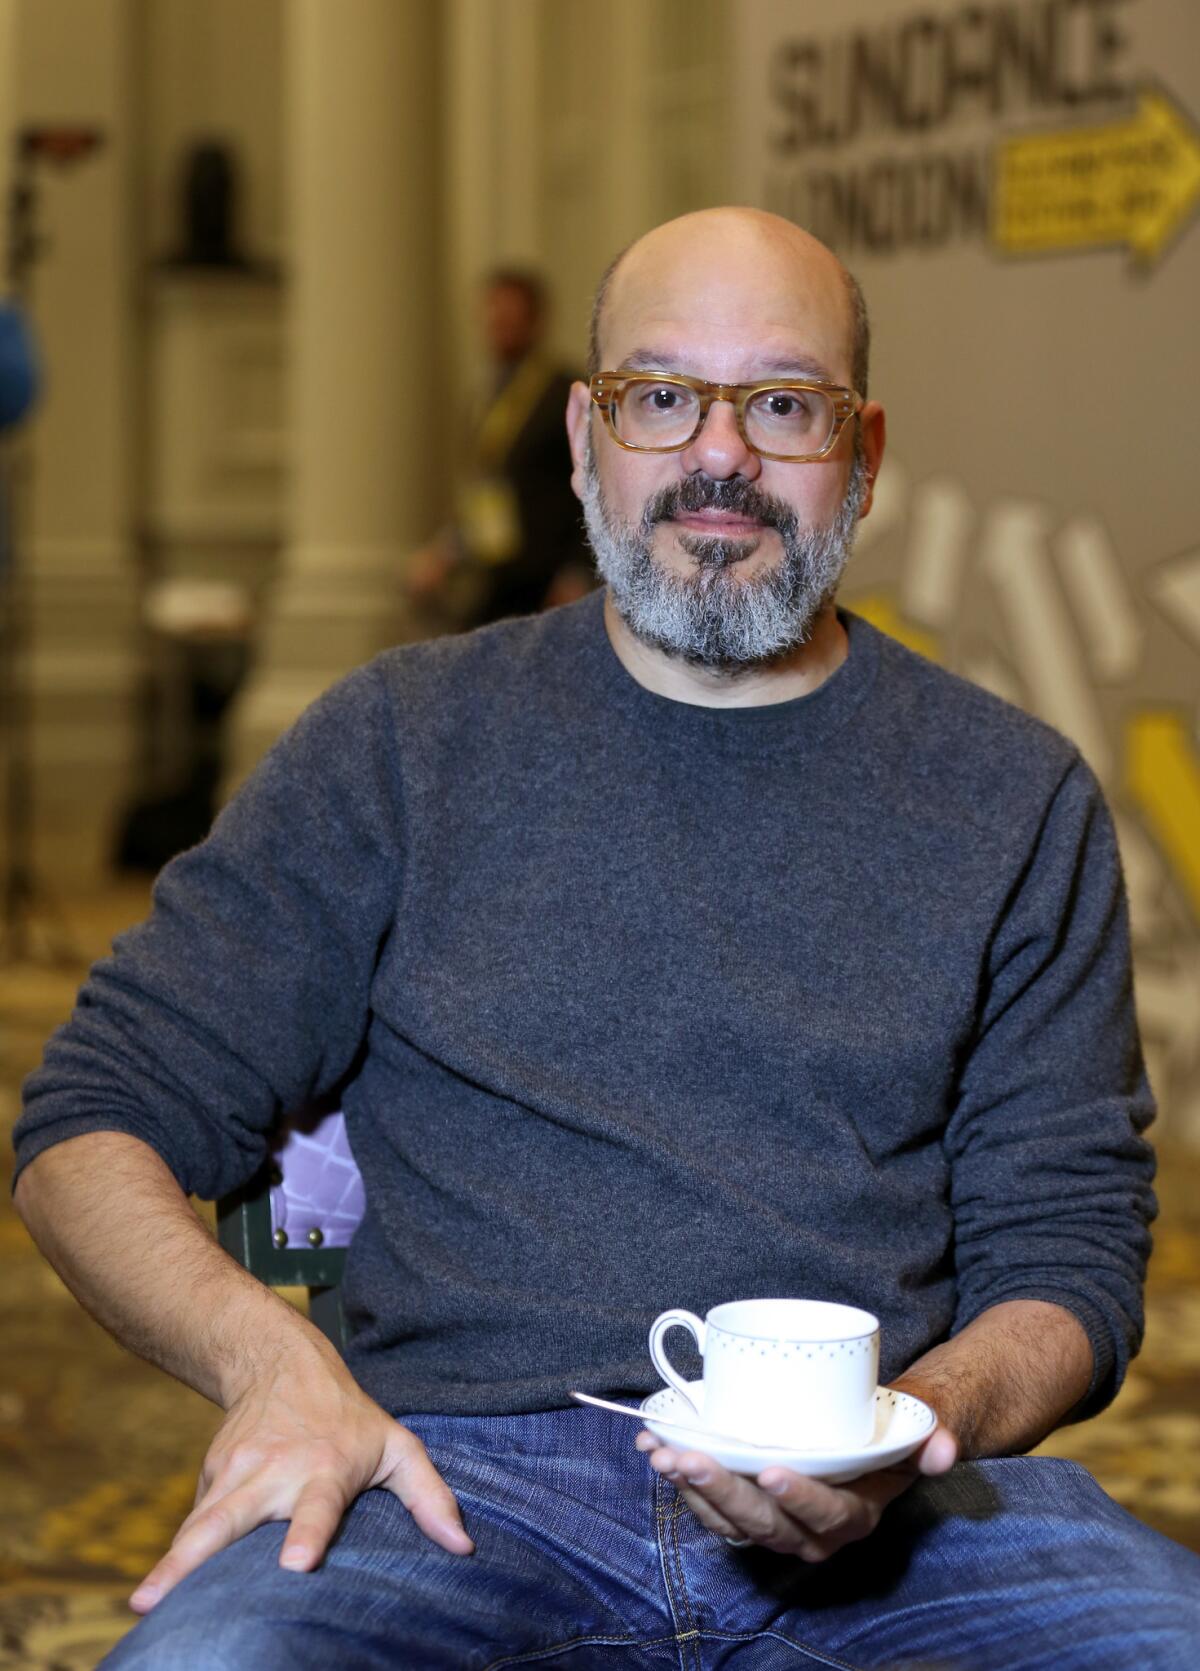 Director David Cross poses as he attends the Film Maker & Press Breakfast during the Sundance London Film and Music Festival 2014 at The Langham Hotel on April 24, 2014 in London, England. (Photo by Tim P. Whitby/Getty Images for Sundance London)